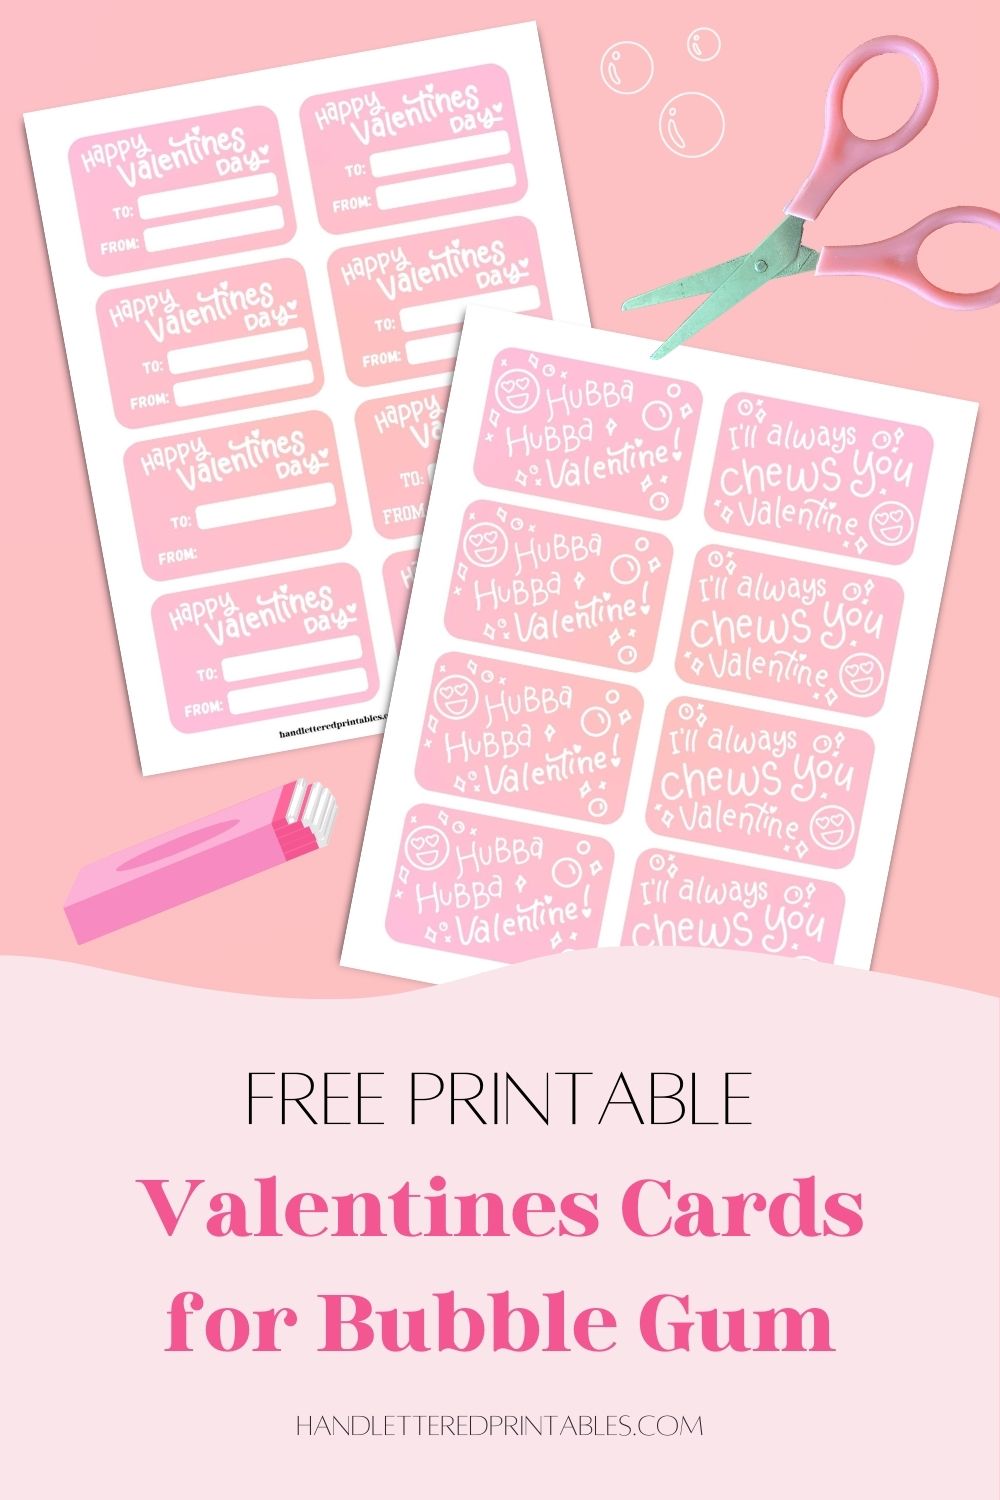 image of printed bubblegum valentines front and back with cartoon pack of gum and scissors. text reads free printable valentines cards for bubble gum